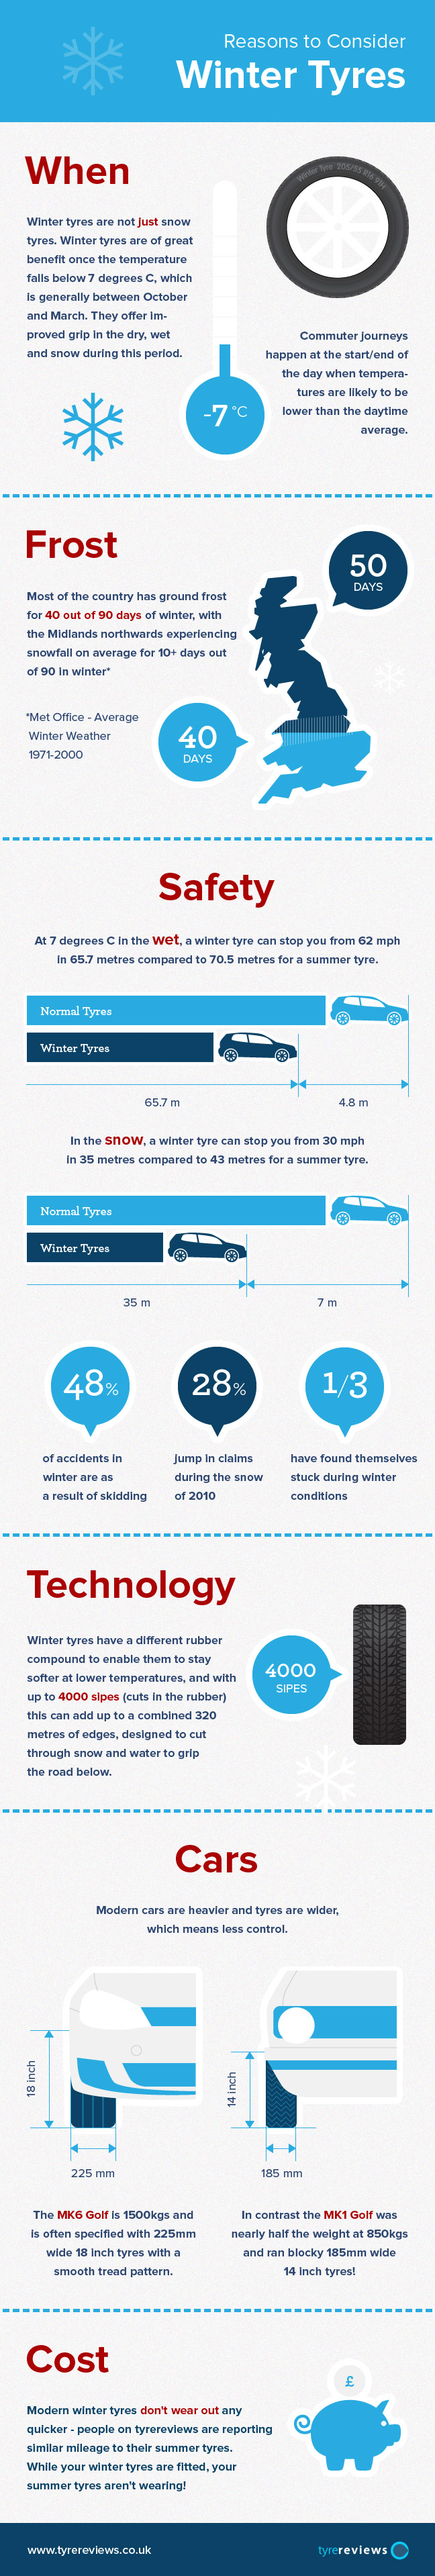 winter-tyre-infographic-tyrereviews.jpg